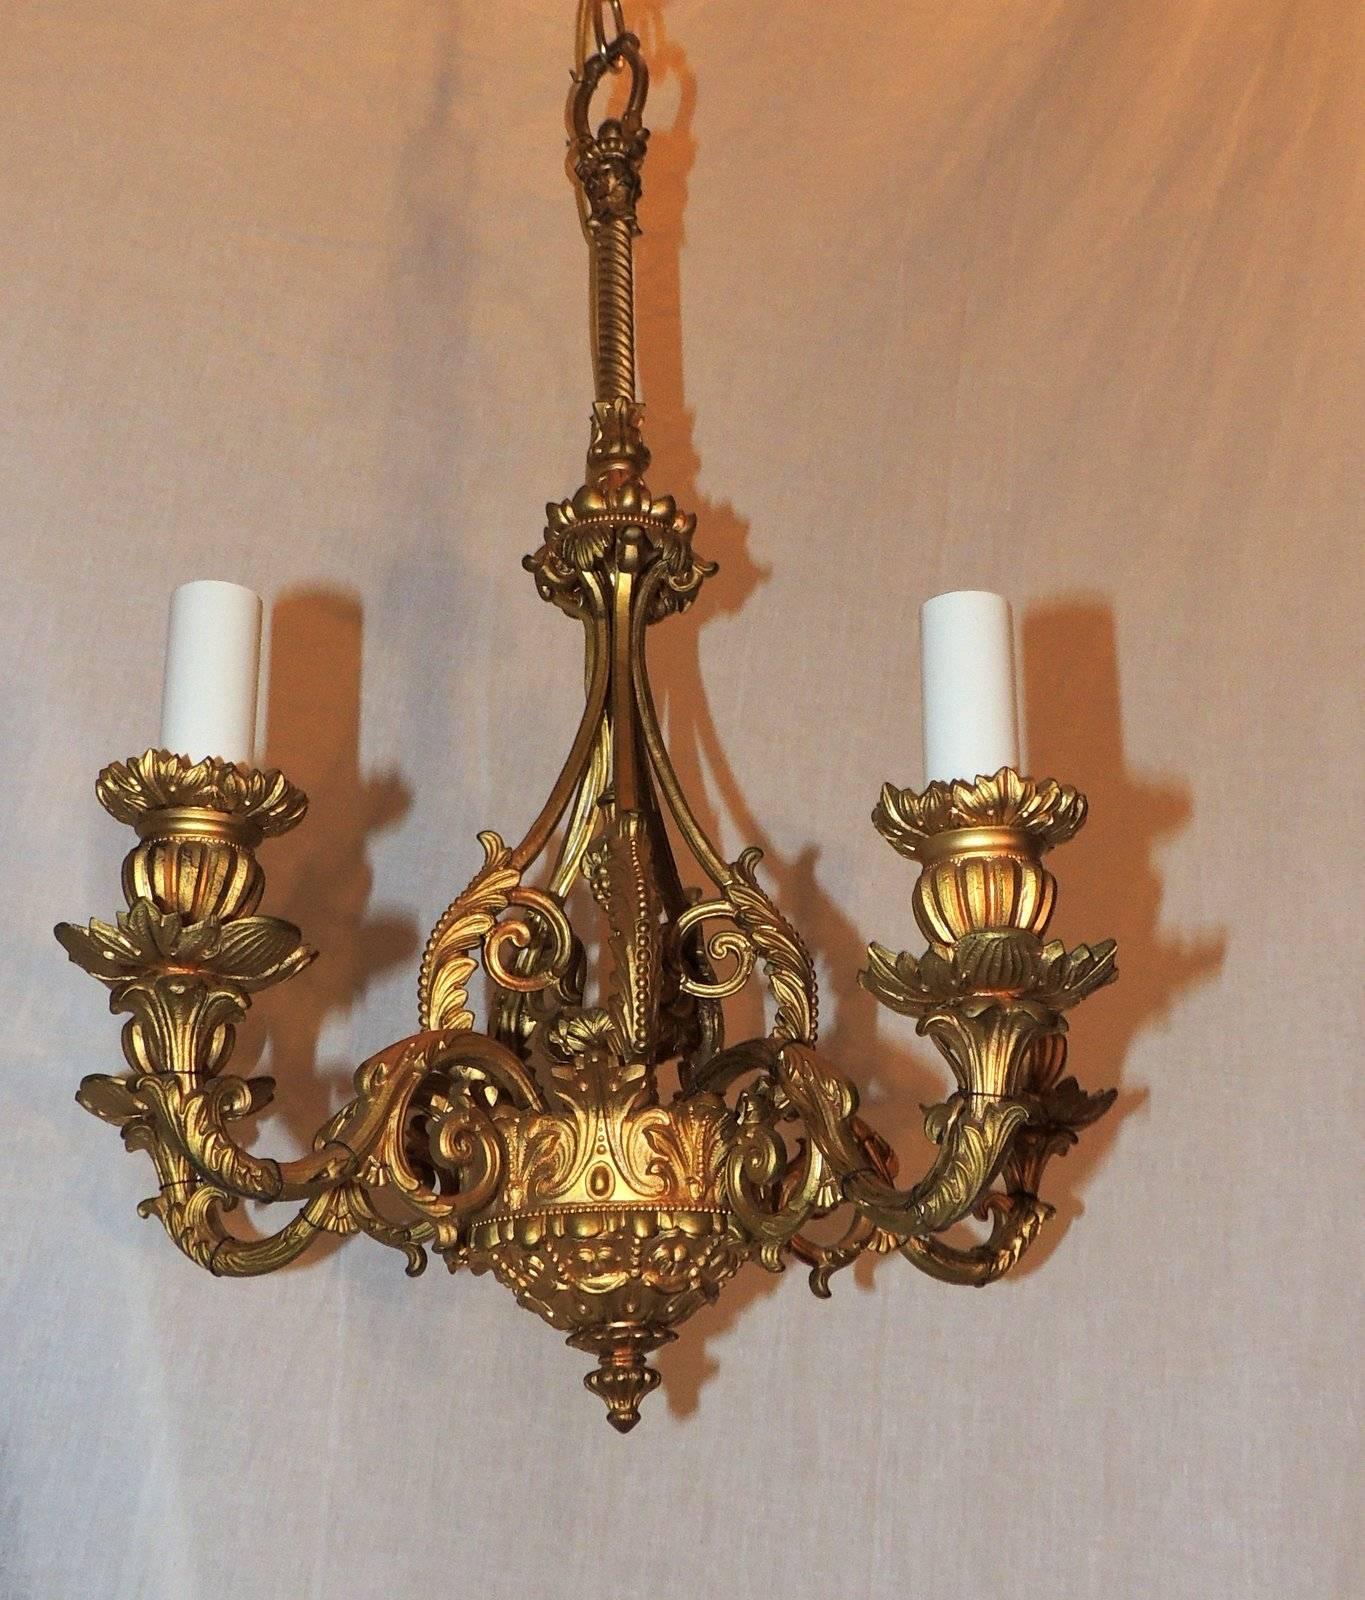 This wonderful pair of Louis XVI Style five-arm chandeliers have intricate doré bronze details throughout.

Measures: 18" H x 12" W

Newly rewired.